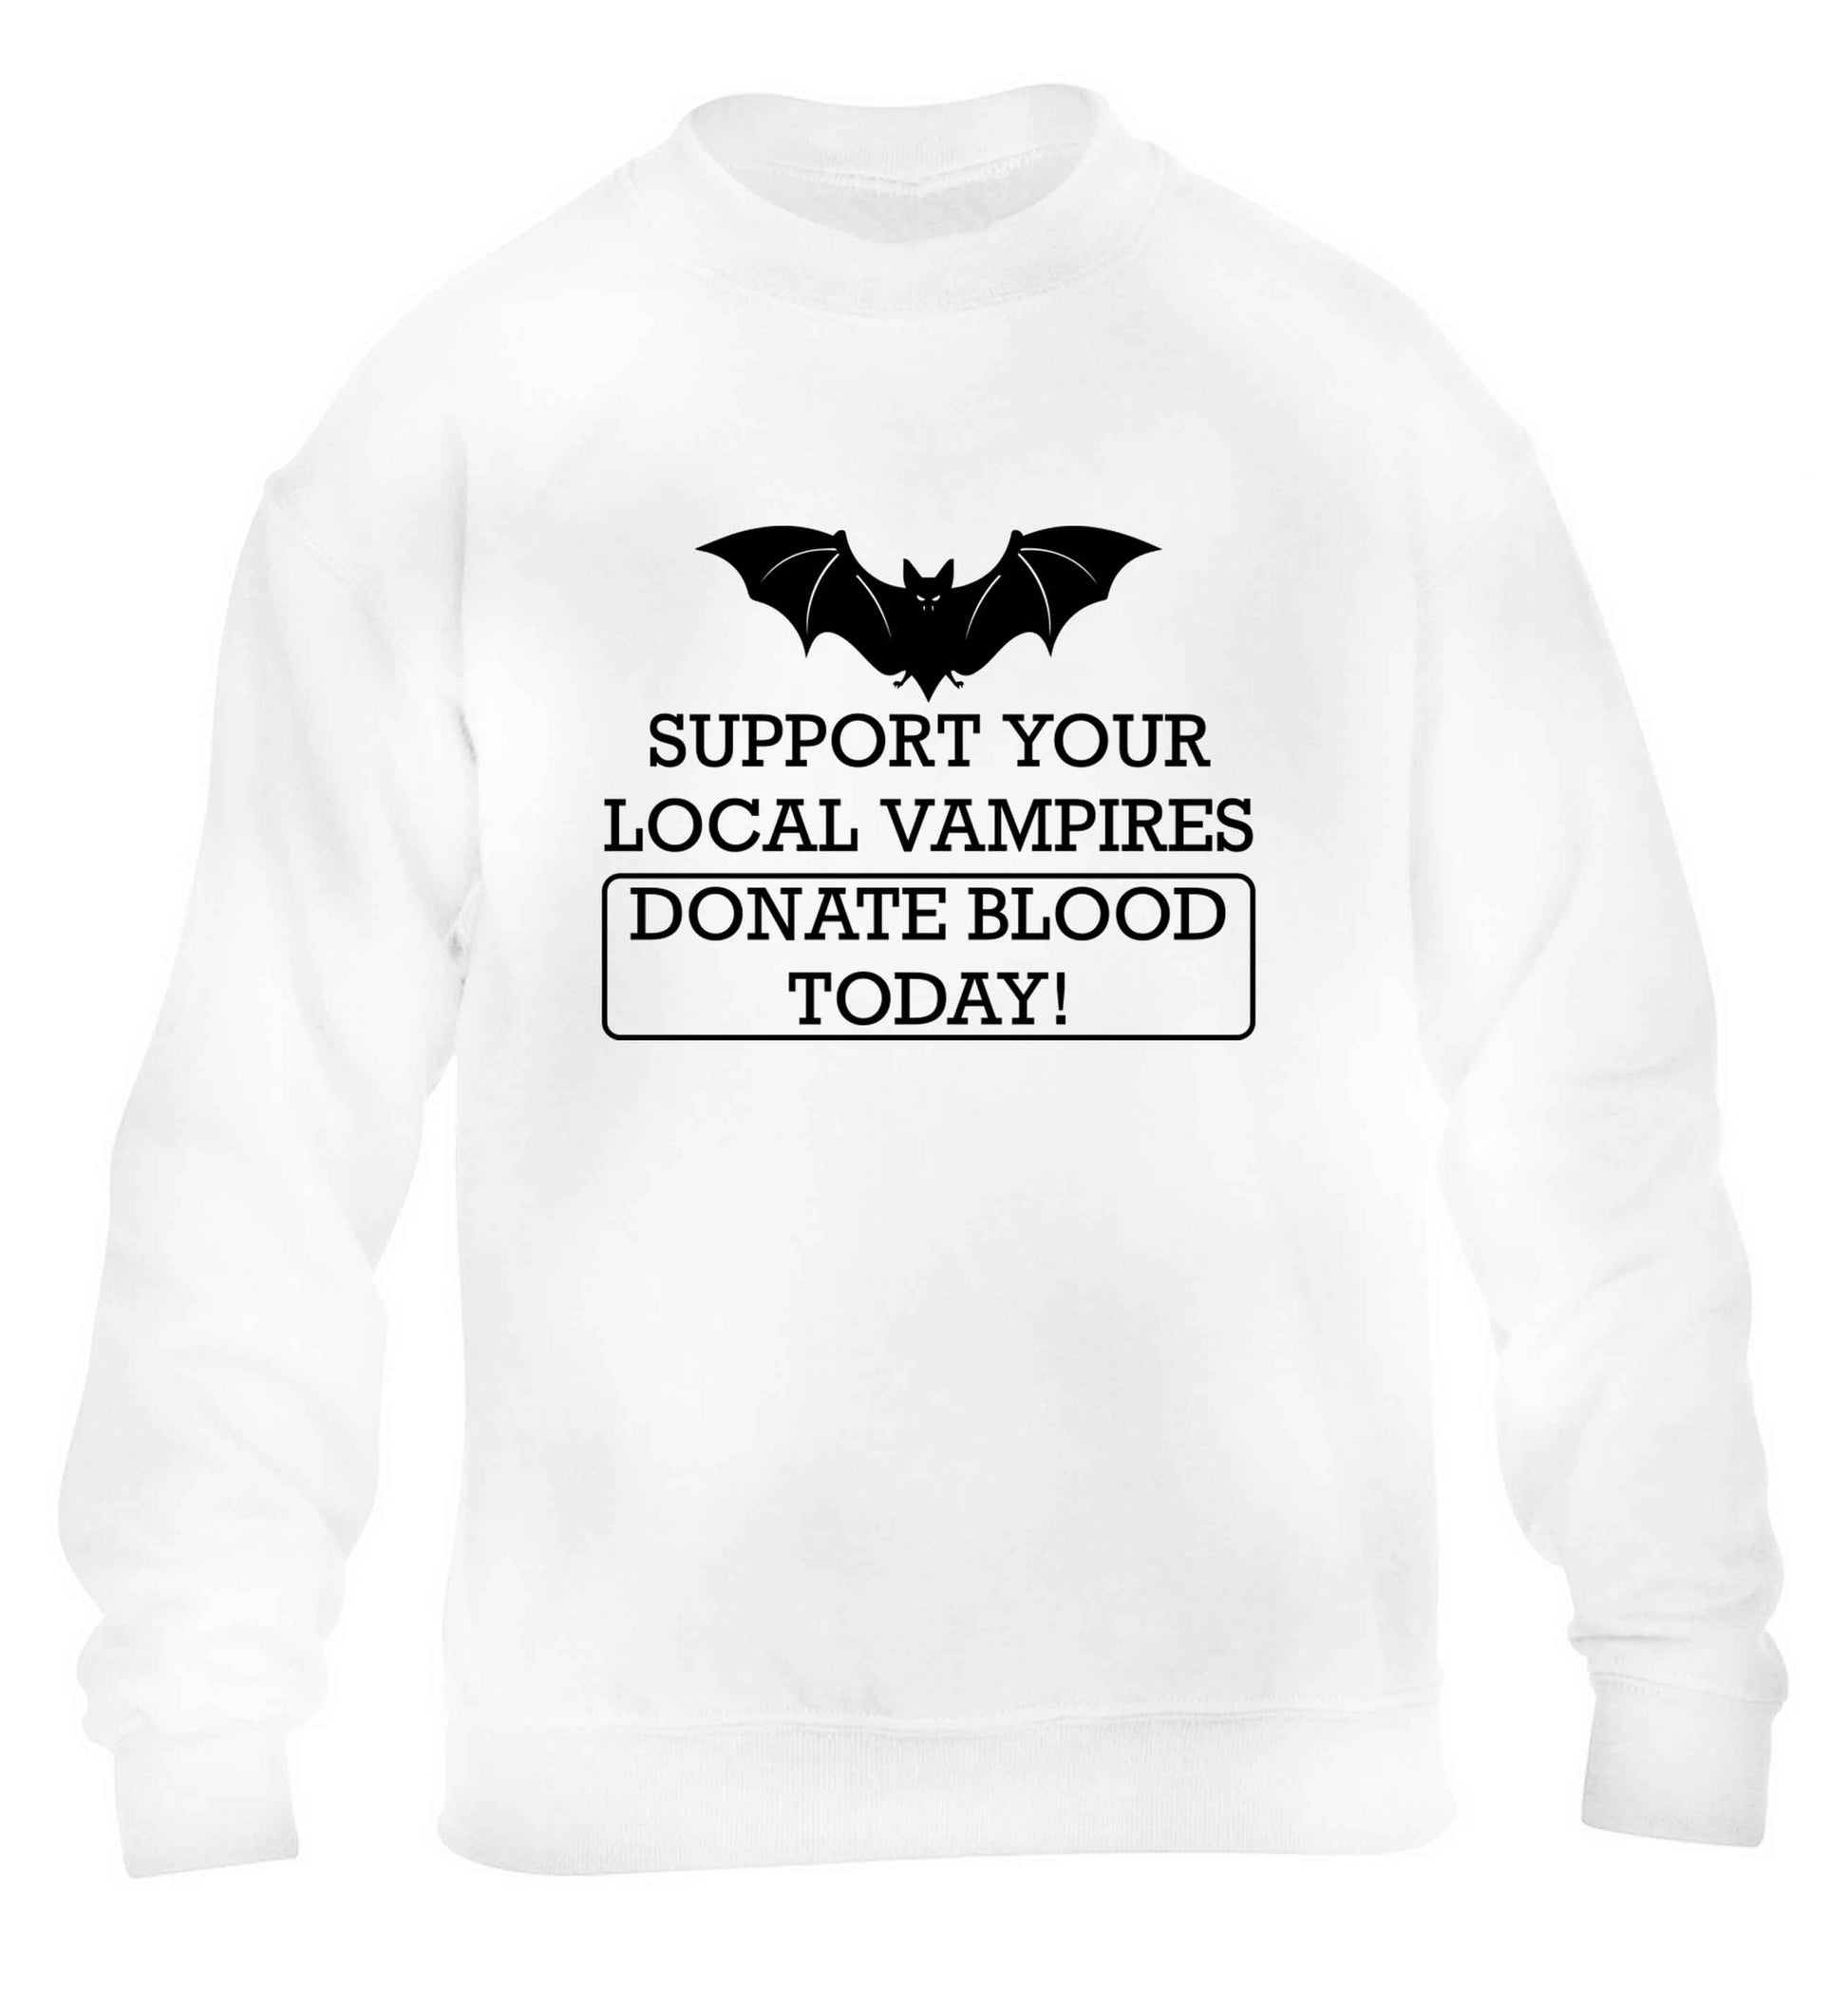 Support your local vampires donate blood today! children's white sweater 12-13 Years